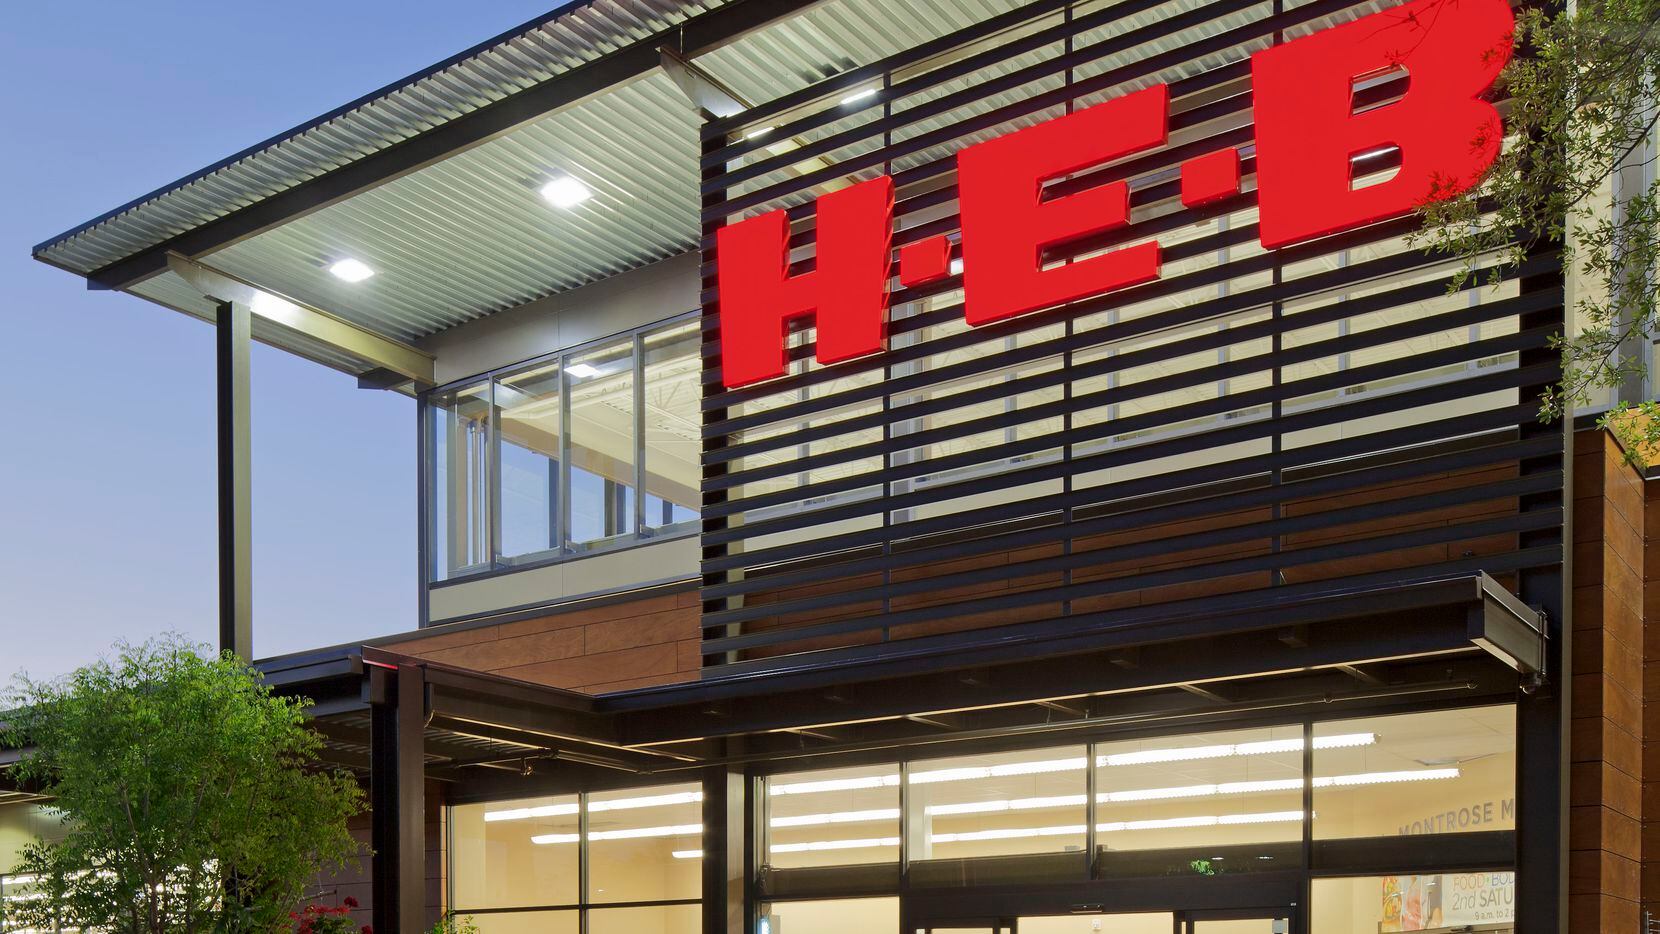 H-E-B is putting its first D-FW stores in suburban Collin County.